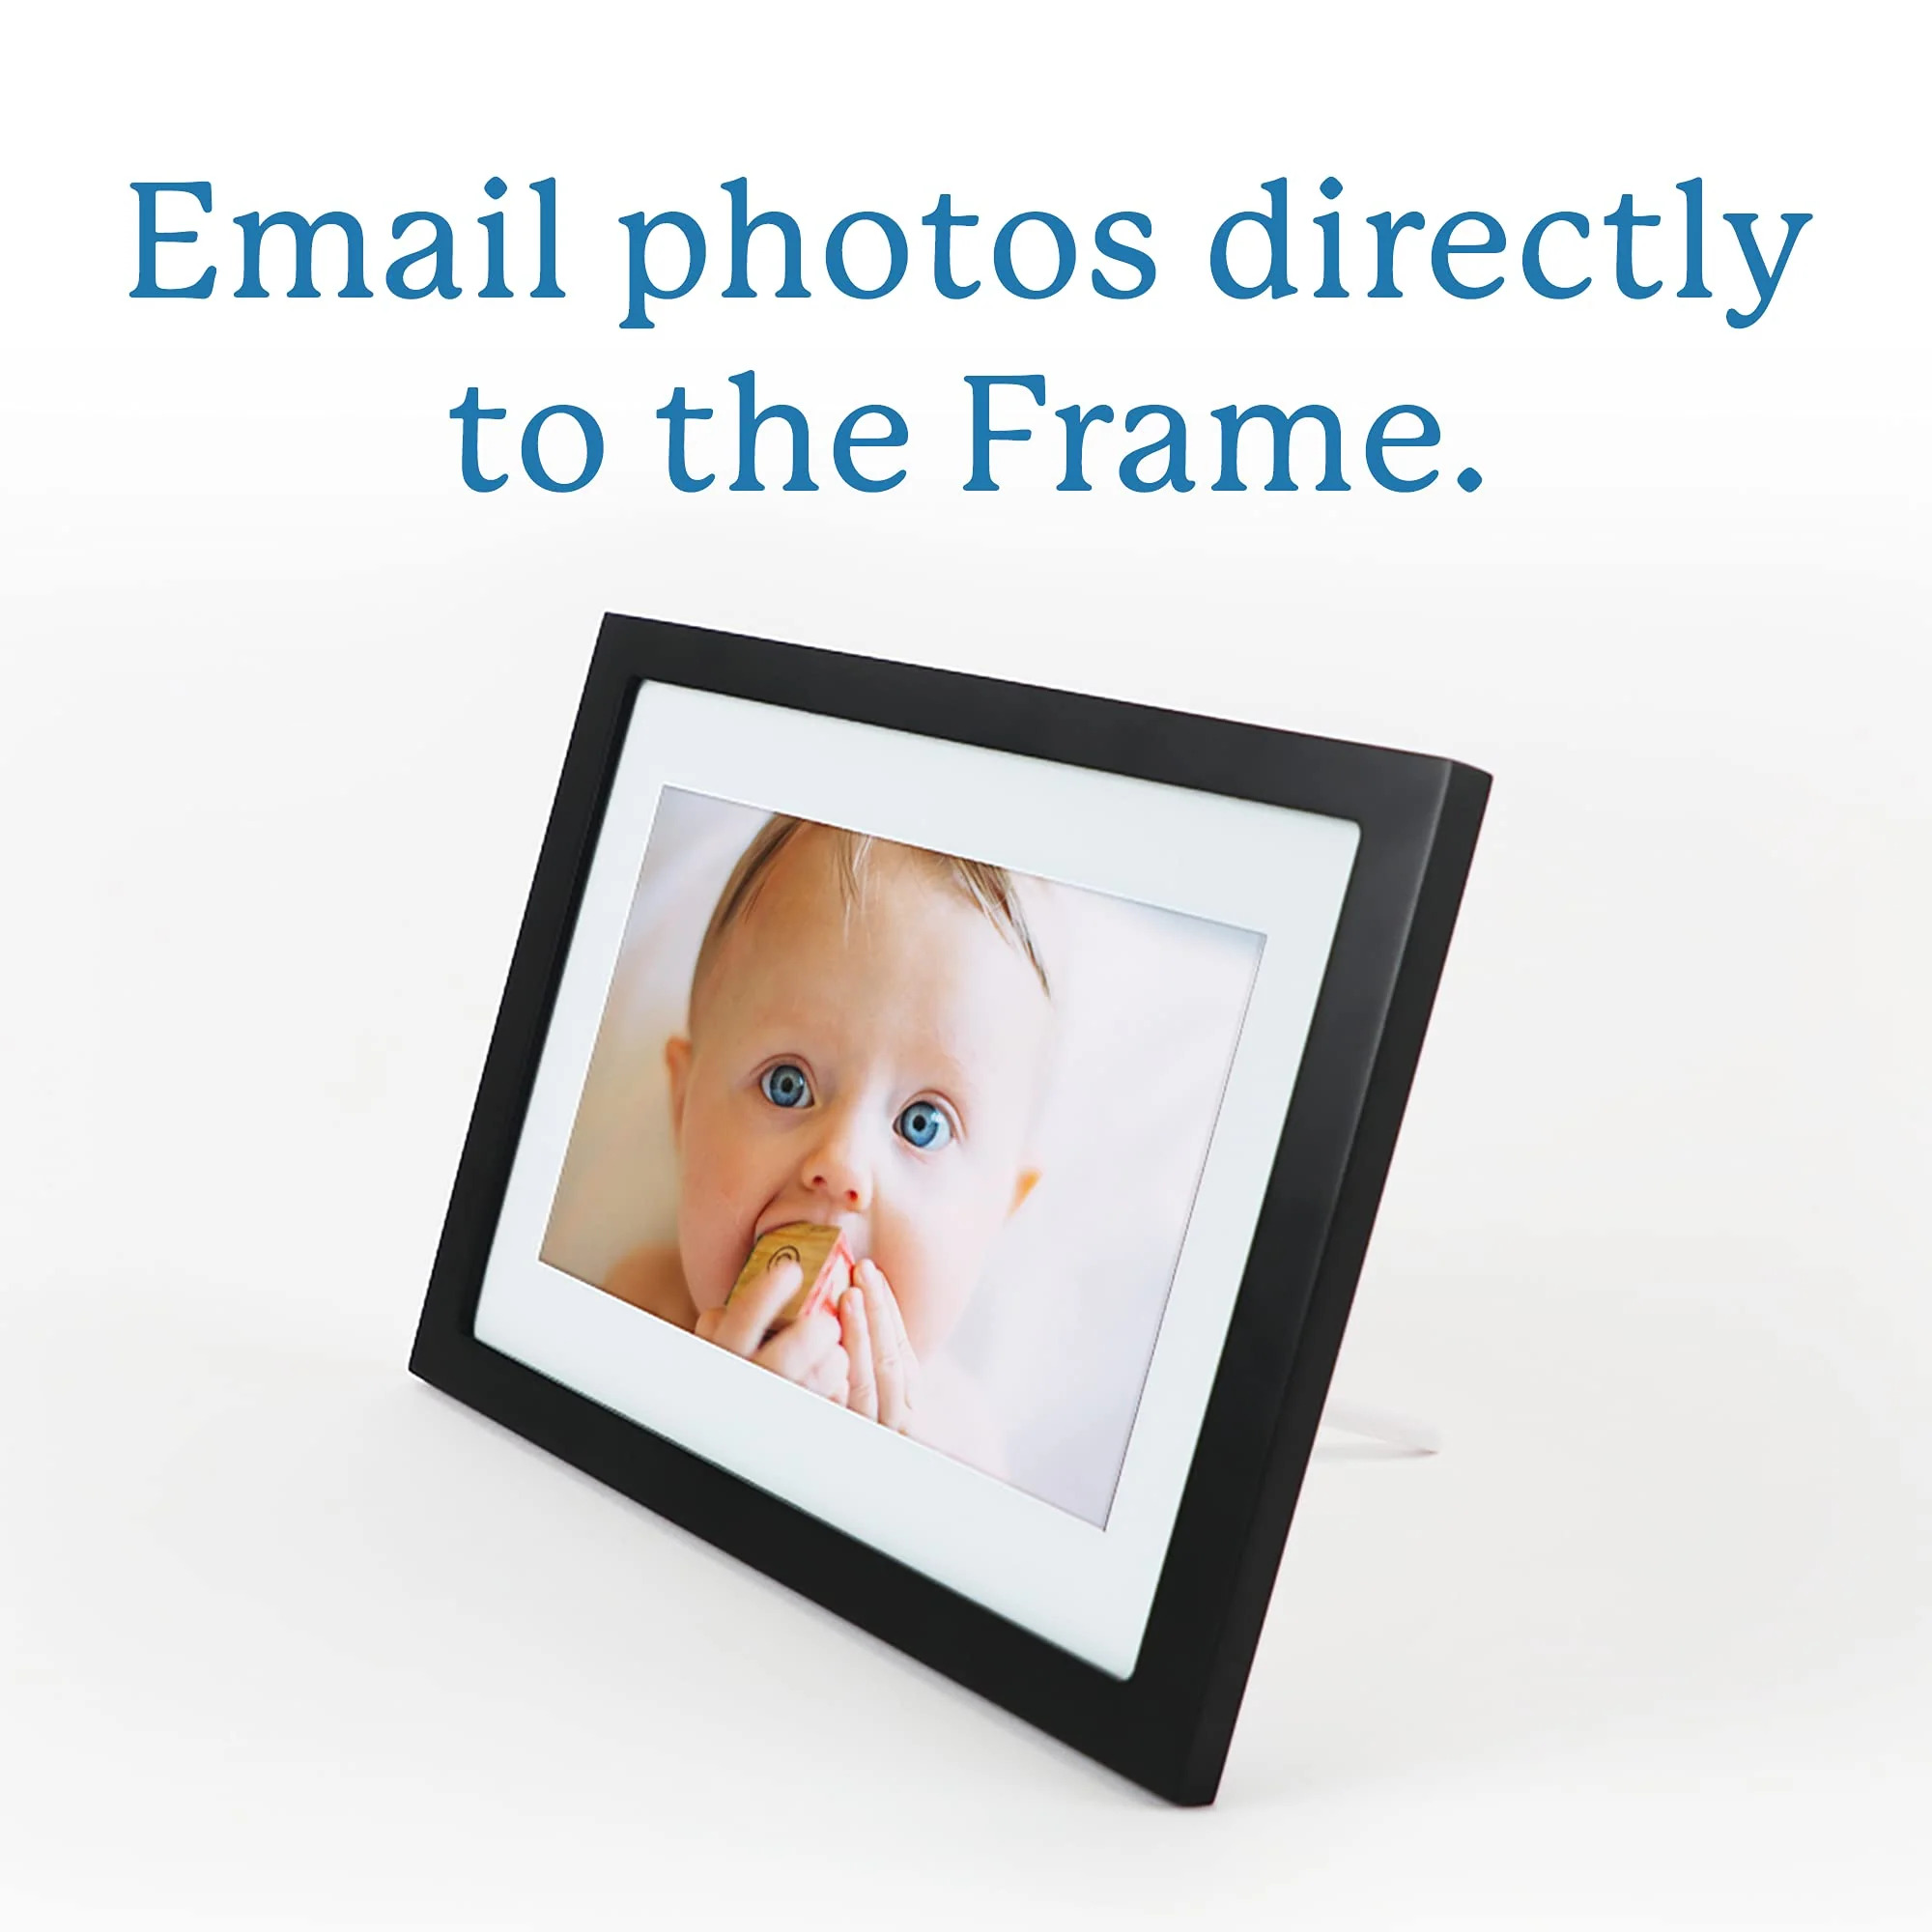 Skylight Frame: 10-inch Wifi Digital Picture Frame, Email Photos from Anywhere, Touch Screen Display - image 3 of 7